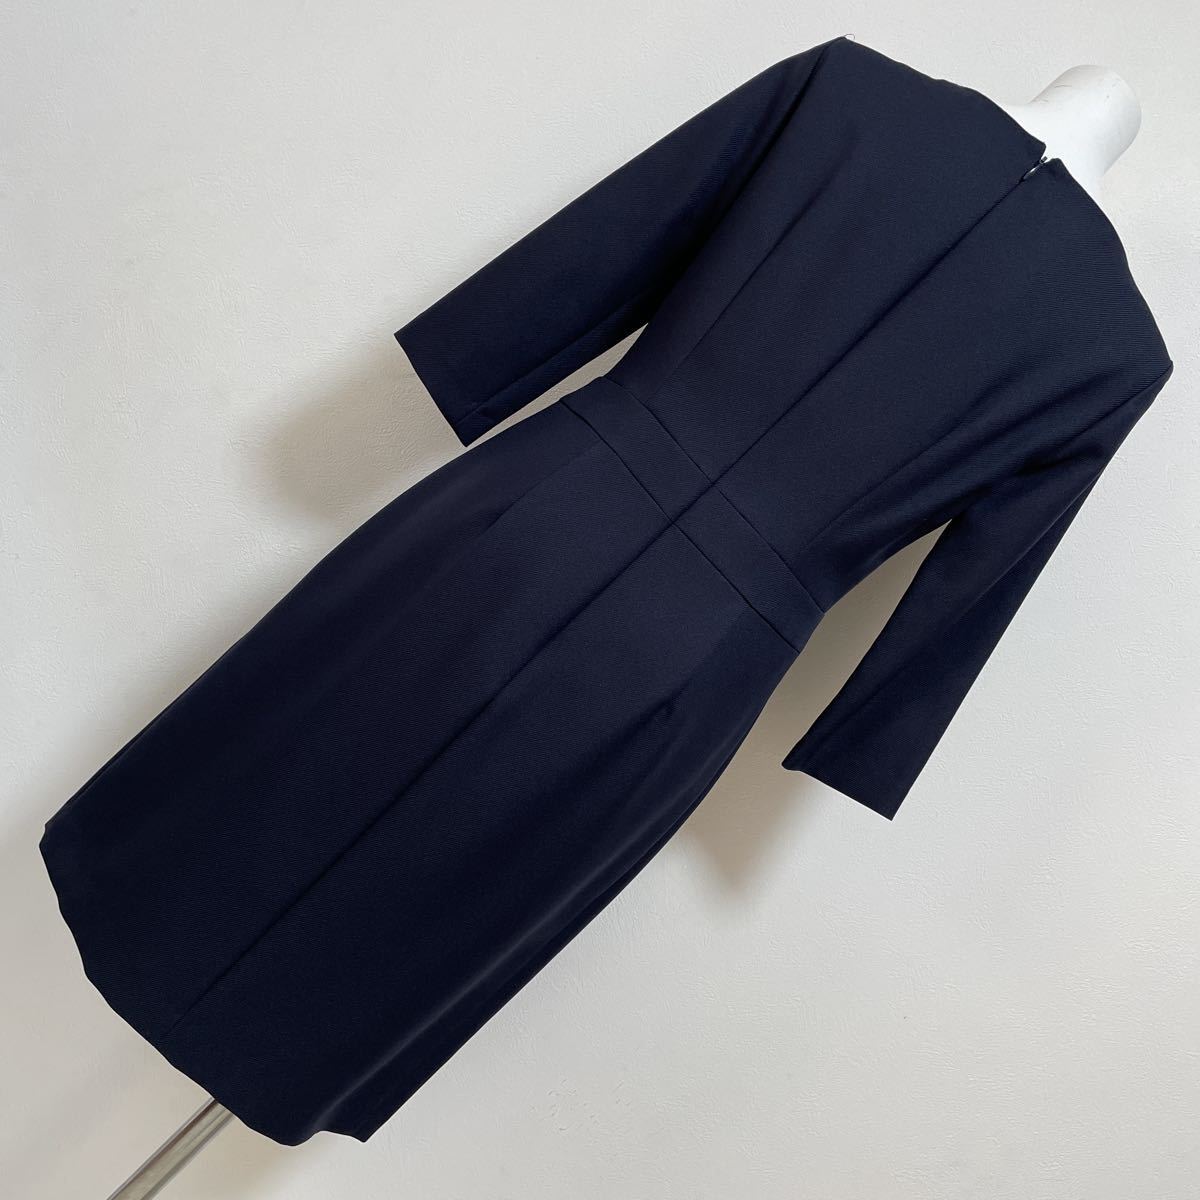 COUP DE CHANCE Coup de Chance lady's formal One-piece go in . type graduation ceremony type . navy made in Japan size 36 beautiful goods kli ending 